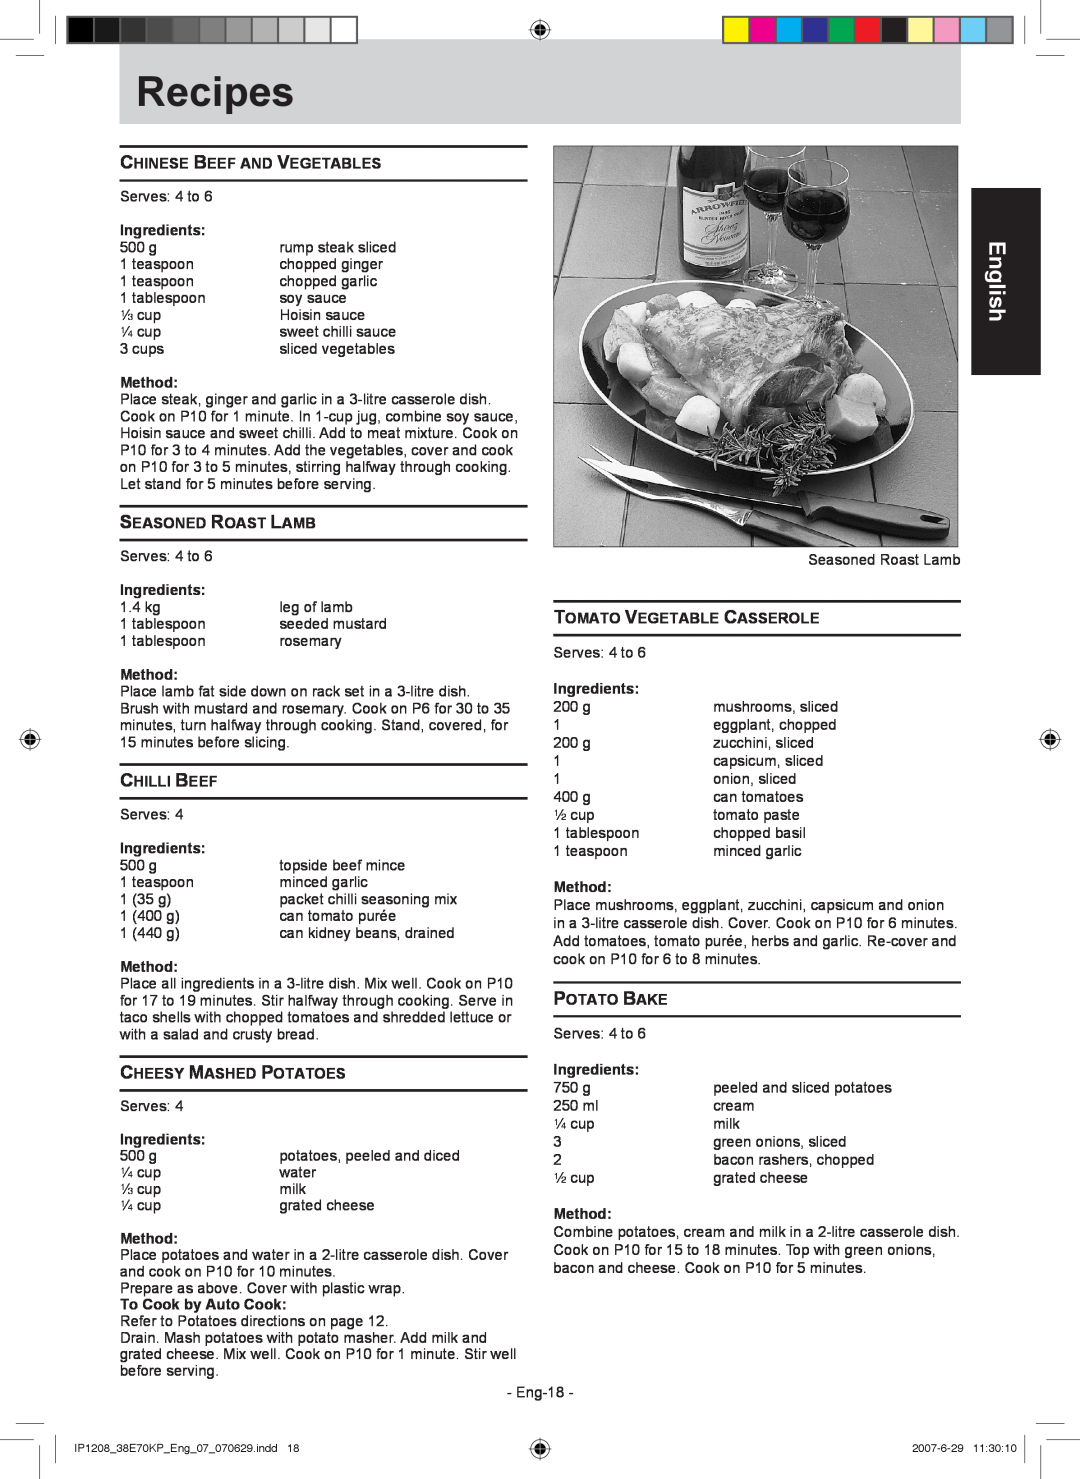 Panasonic NN-ST757W manual Recipes, English, Chinese Beef And Vegetables 